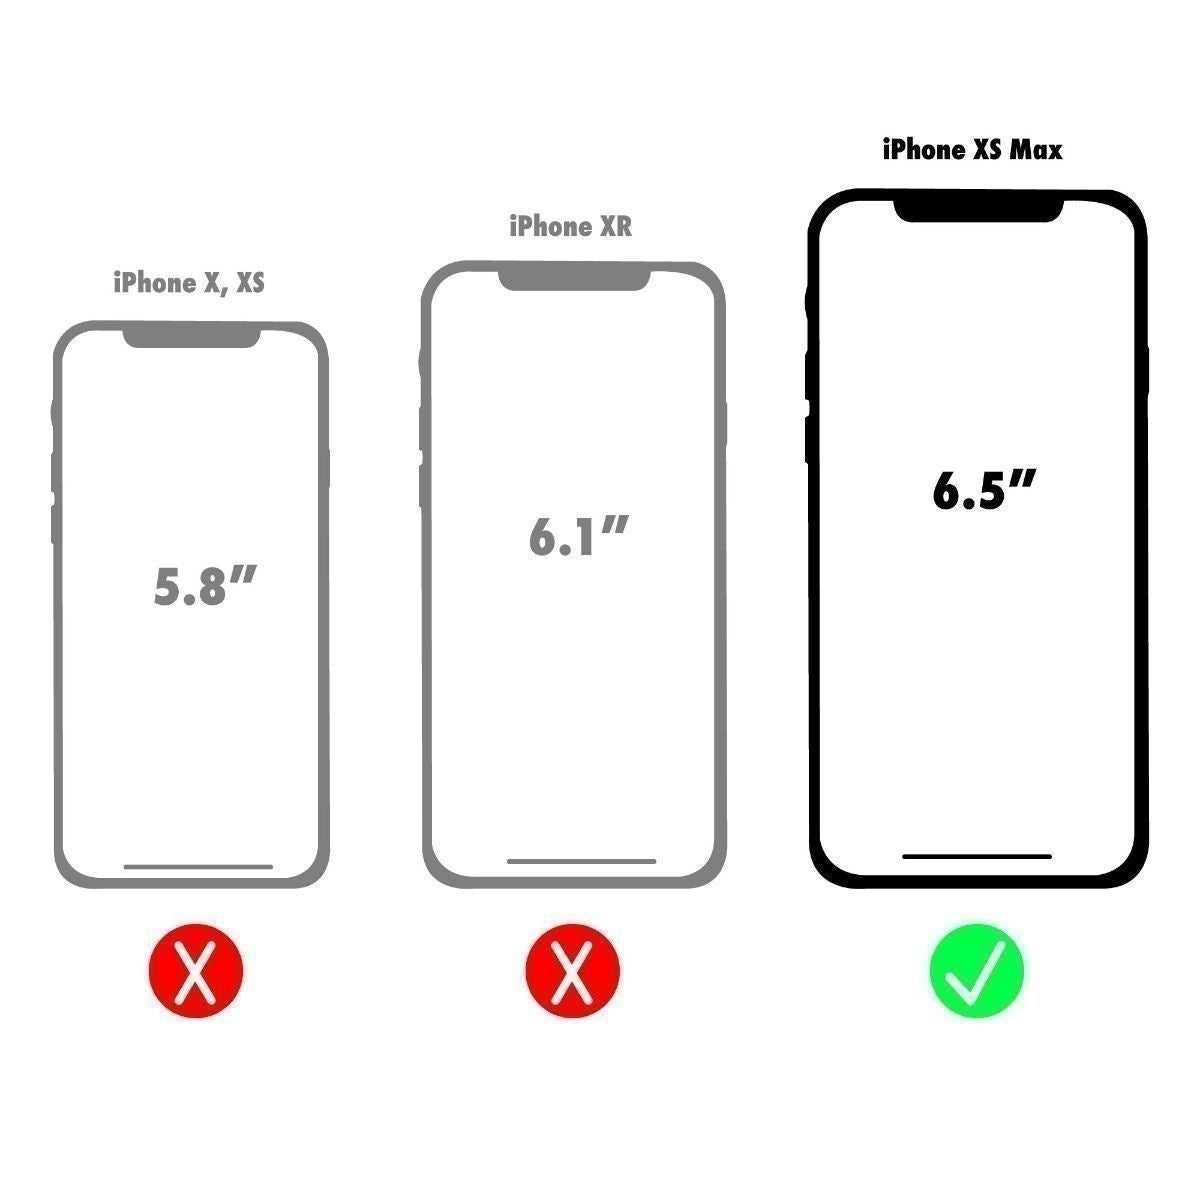 Spigen Slim Armor Crystal Series Case for Apple iPhone XS Max - Crystal Clear Cell Phone - Cases, Covers & Skins Spigen    - Simple Cell Bulk Wholesale Pricing - USA Seller